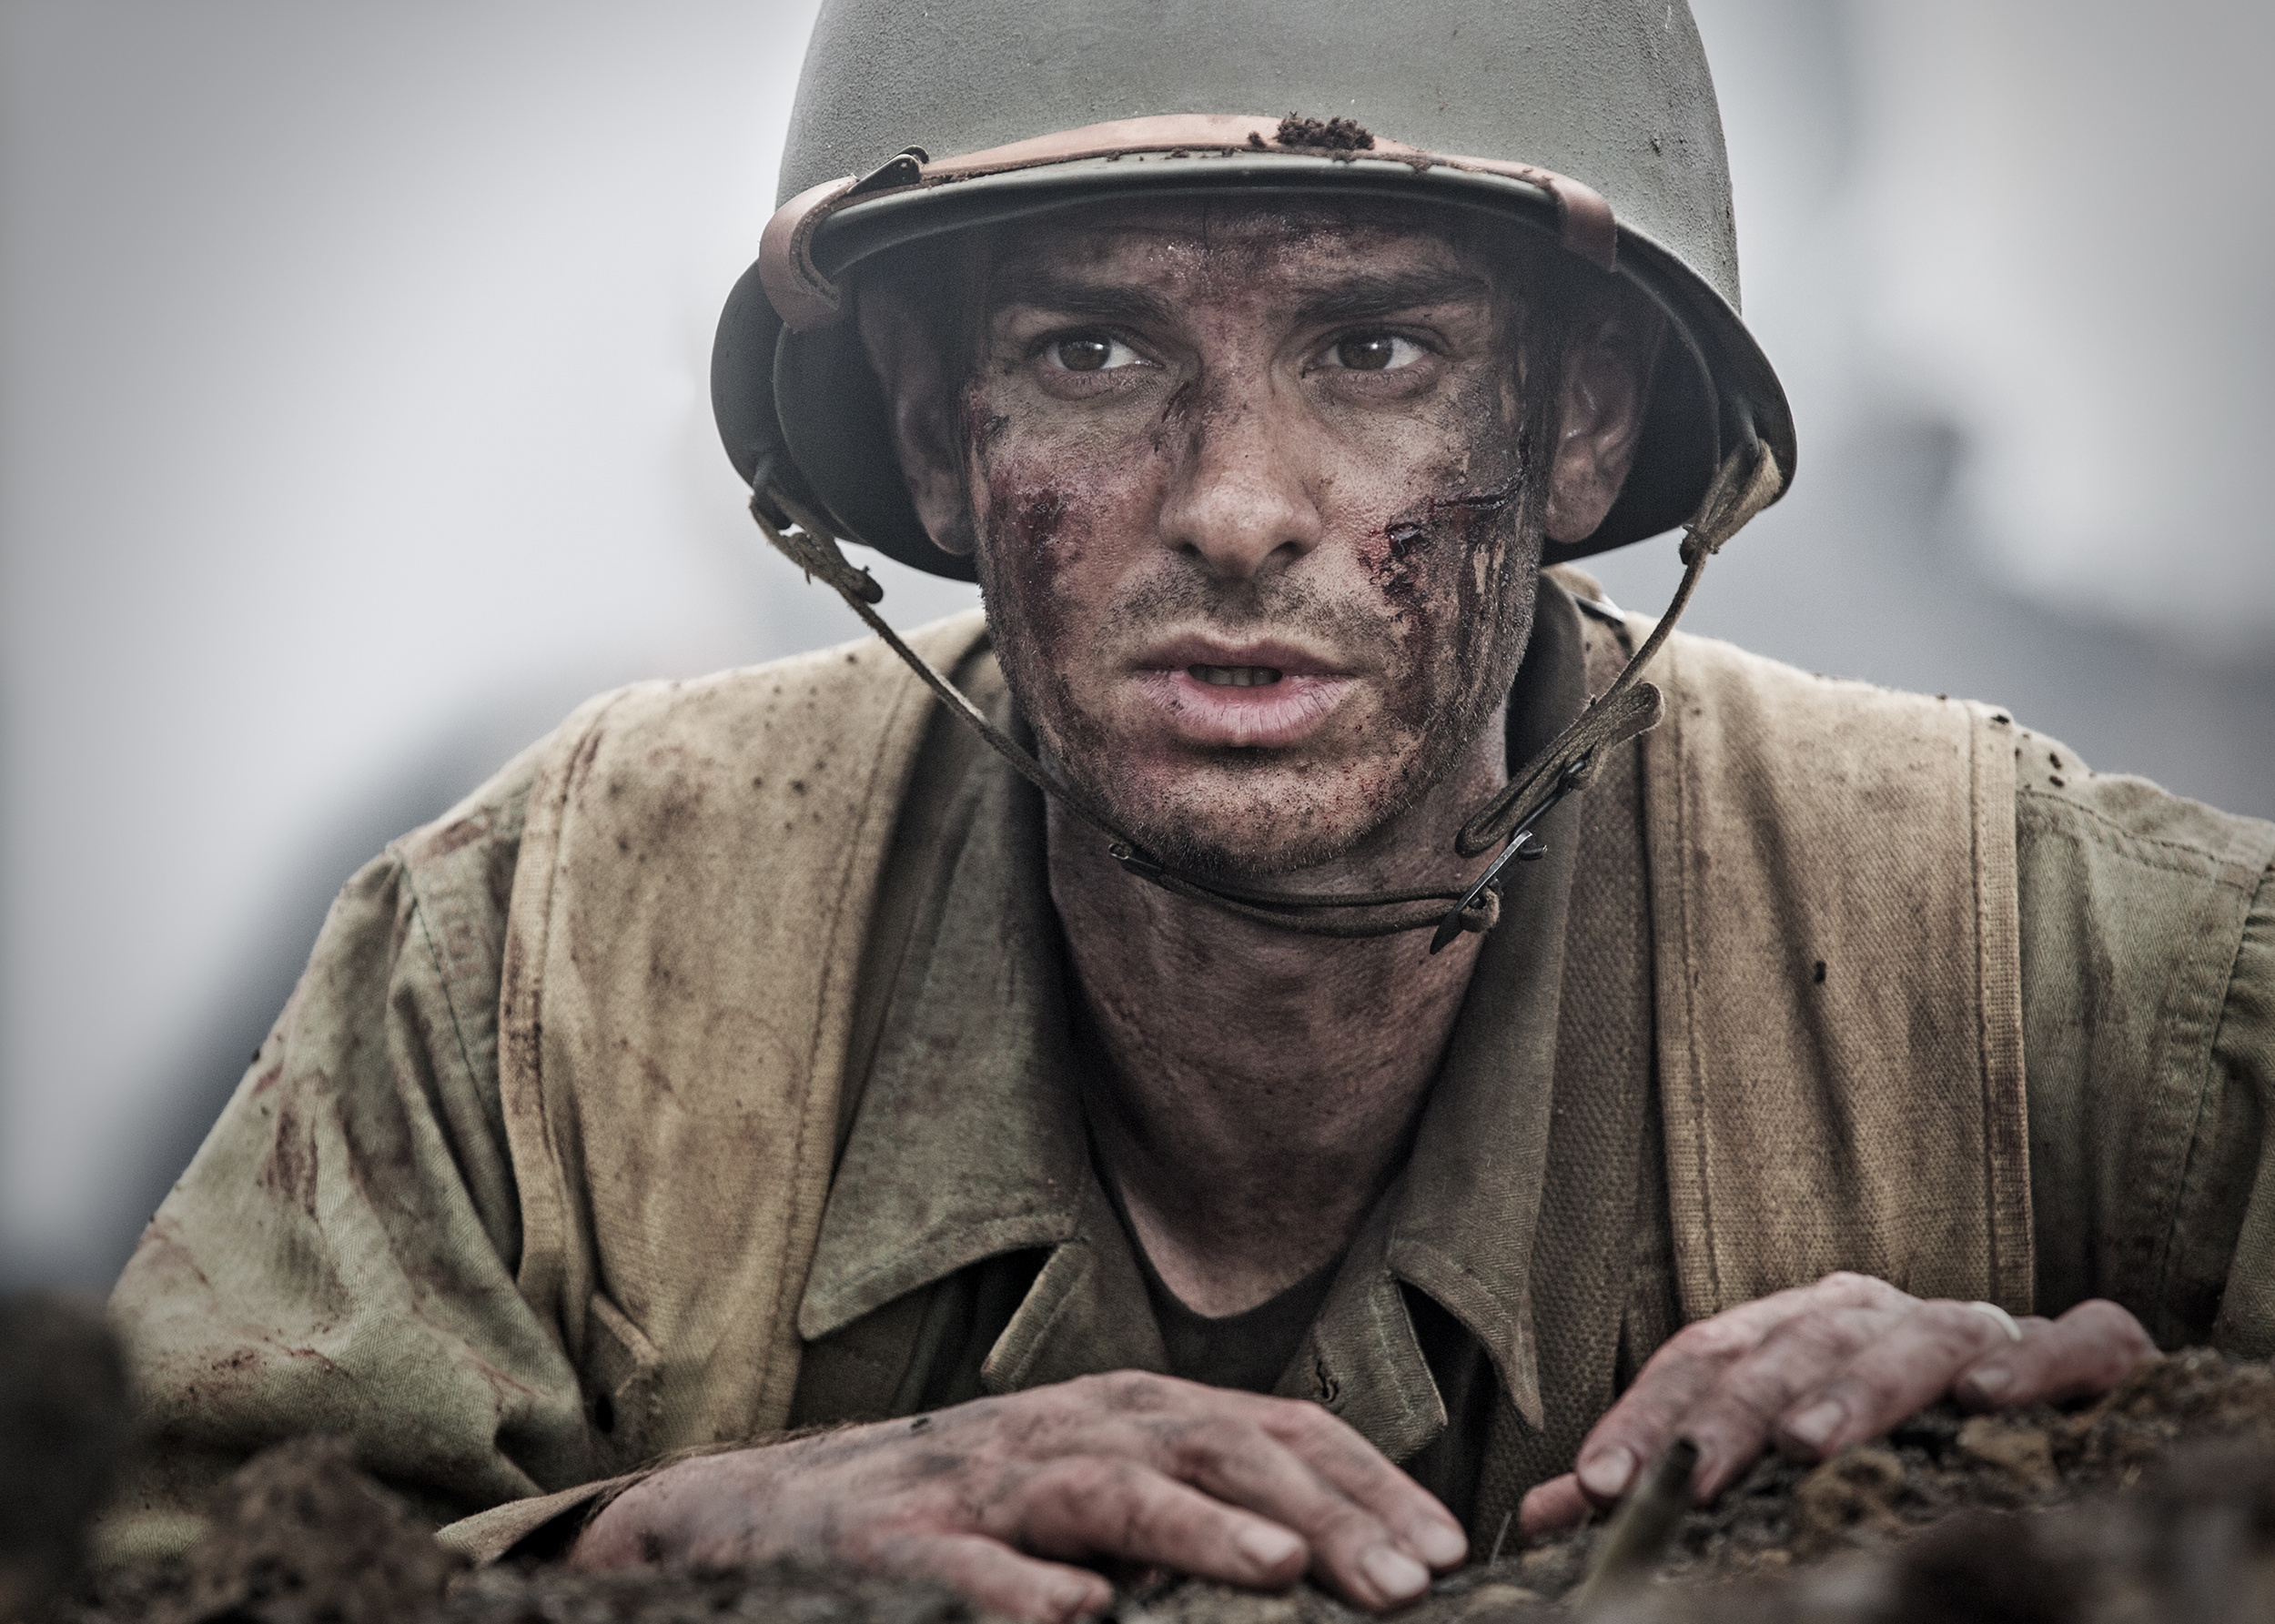 <p>There’s really no reason to write an original war story when there are already so many unbelievable real-life war stories. Take <em>Hacksaw Ridge</em>, a film based on a documentary that tells the incredible story of Desmond Doss, a soldier who refused to use a weapon during World War II. </p><p>You may also like: <a href='https://www.yardbarker.com/entertainment/articles/the_20_best_foreign_horror_movies/s1__39305414'>The 20 best foreign horror movies</a></p>